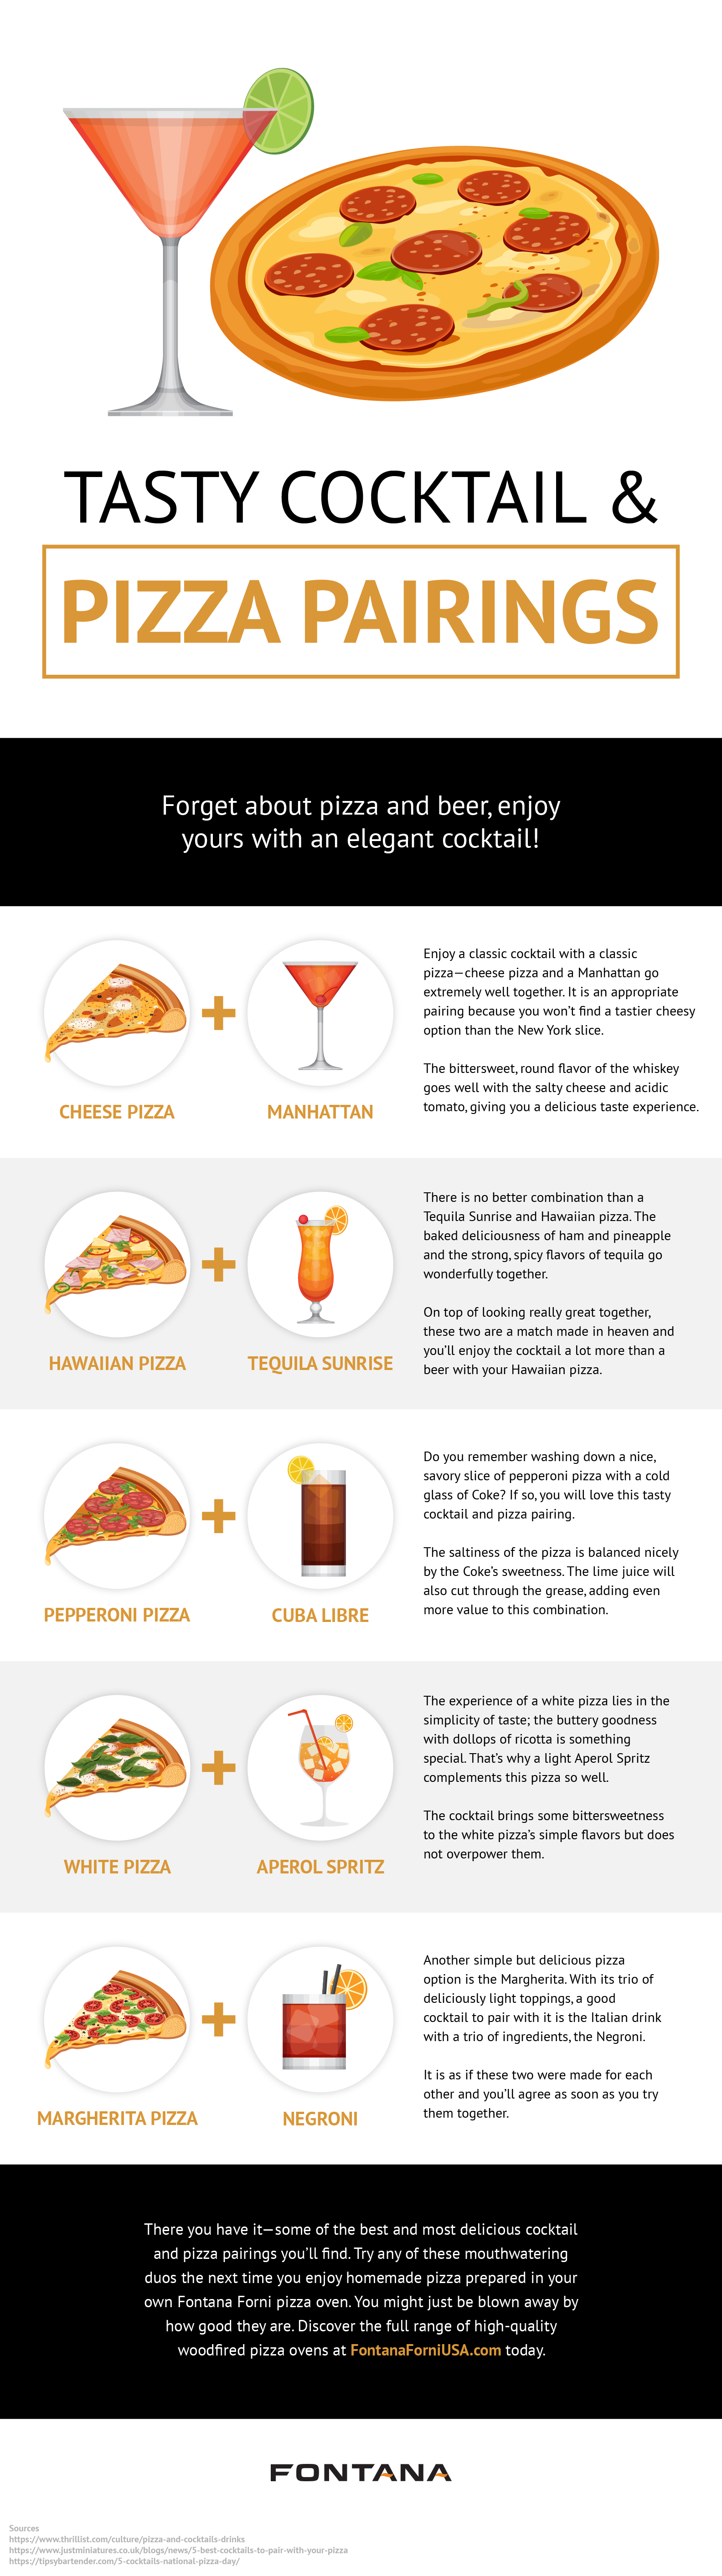 Tasty Cocktail and Pizza Pairings Infographic